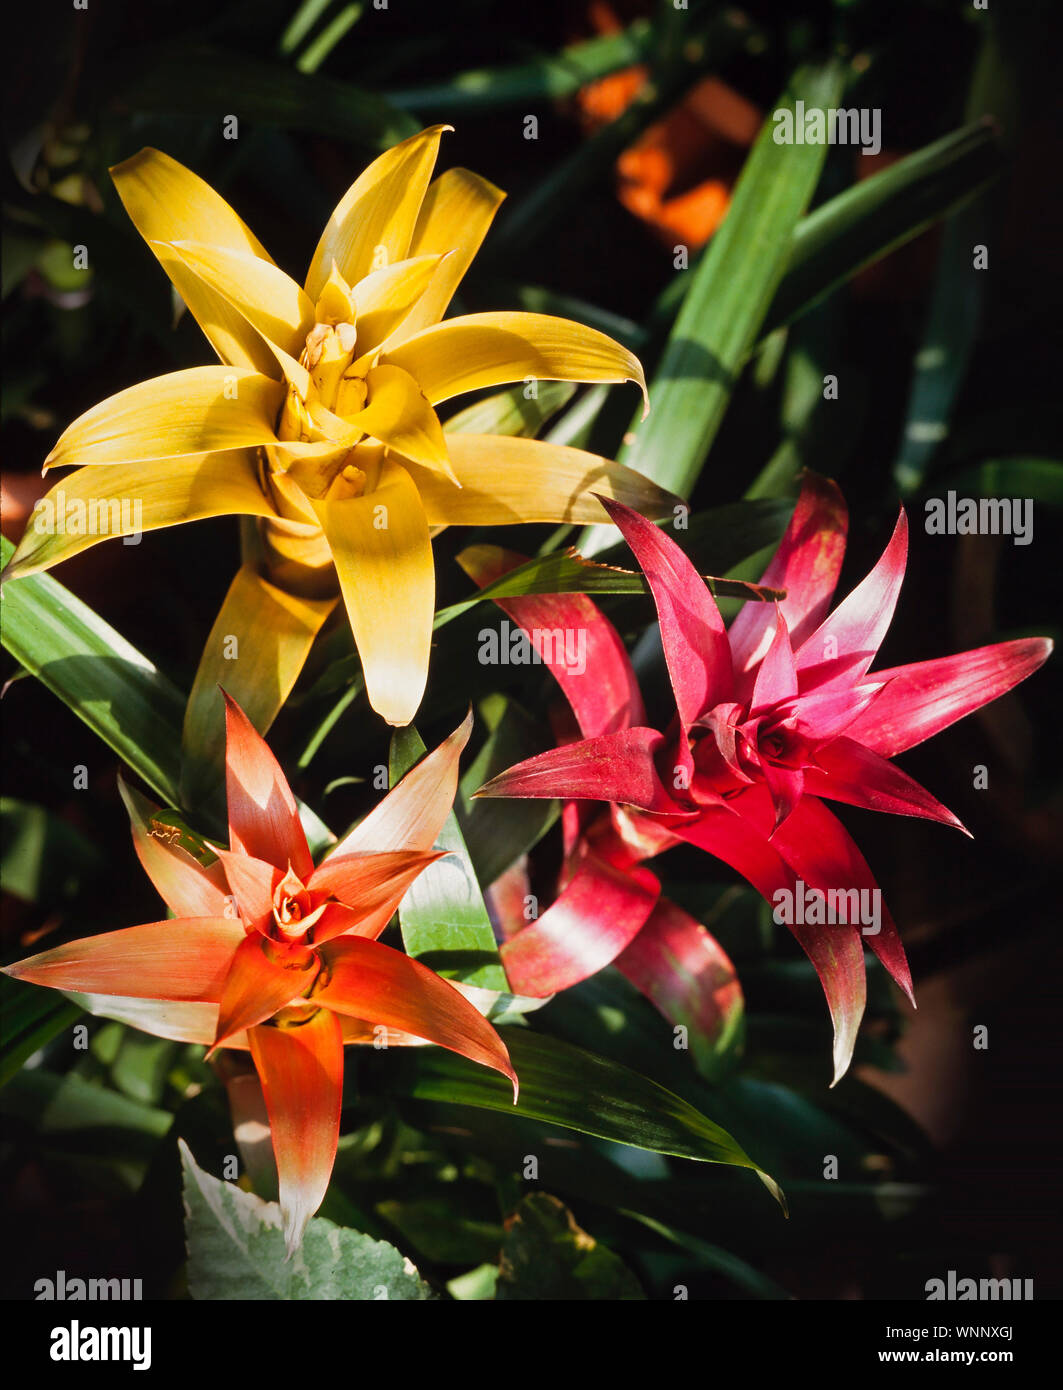 Bromiliad colour varieties, colour diversity, native to South America Stock Photo